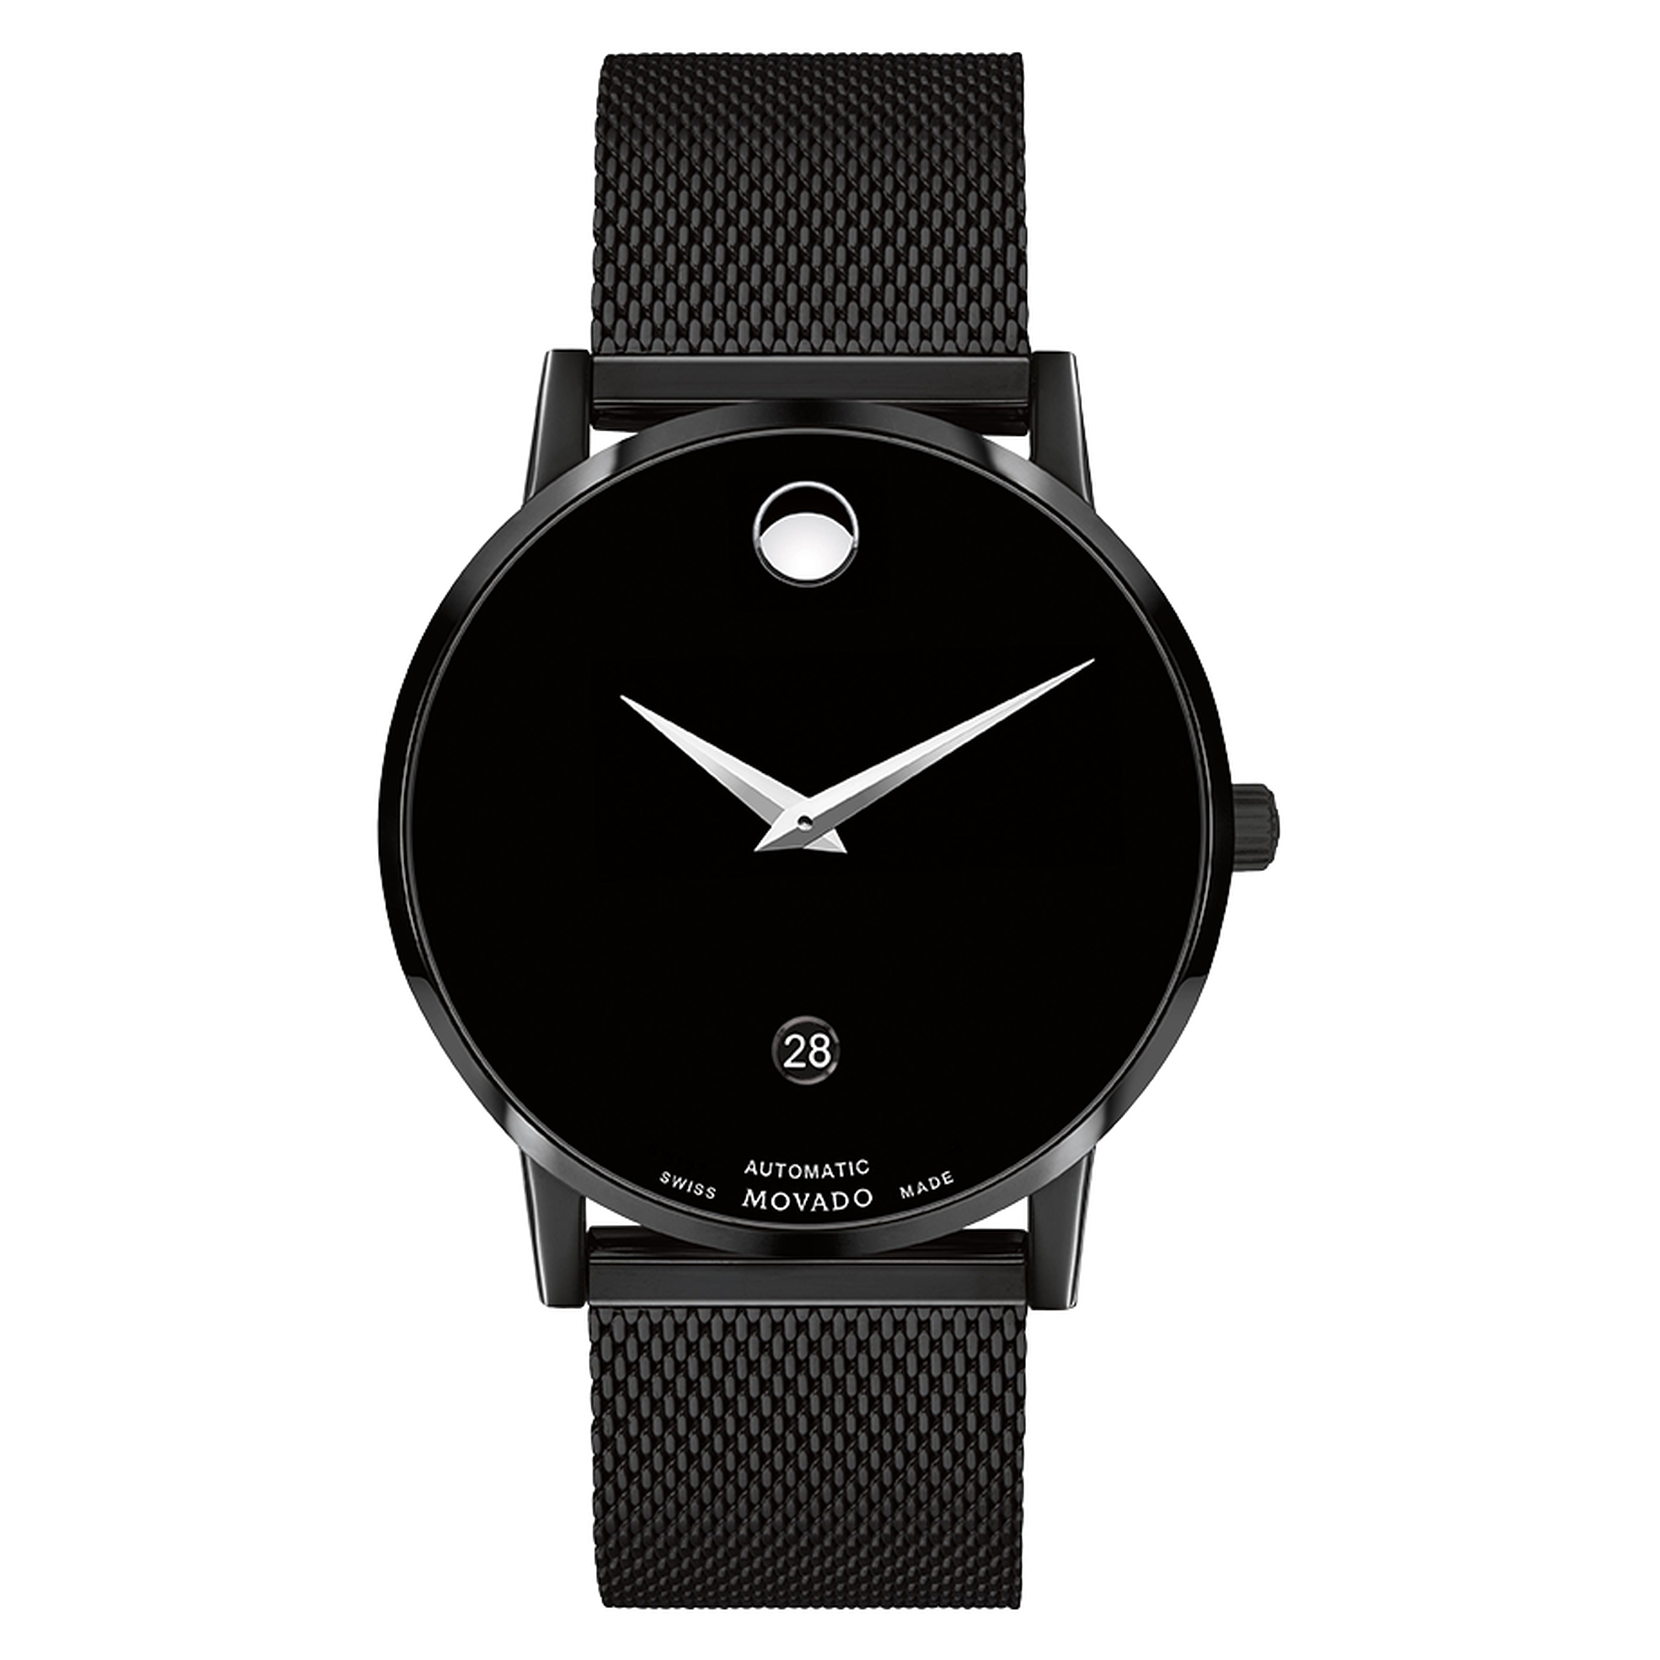 Museum and display stainless with Classic movement dial watch black exposed Movado| caseback bracelet mesh steel Automatic and to structure